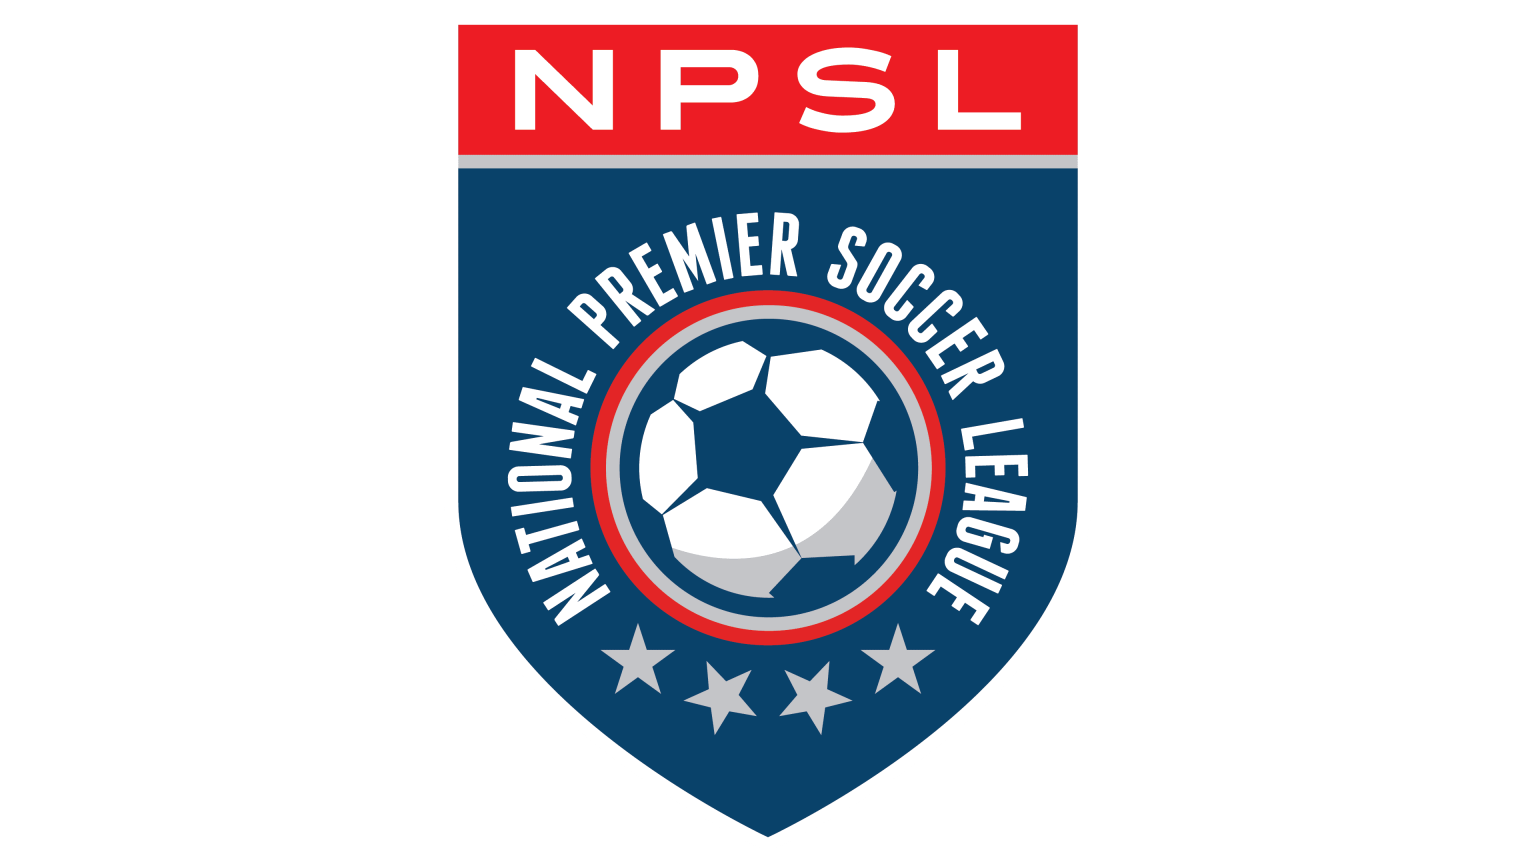 National Premier Soccer League (NPSL) logo and symbol, meaning, history